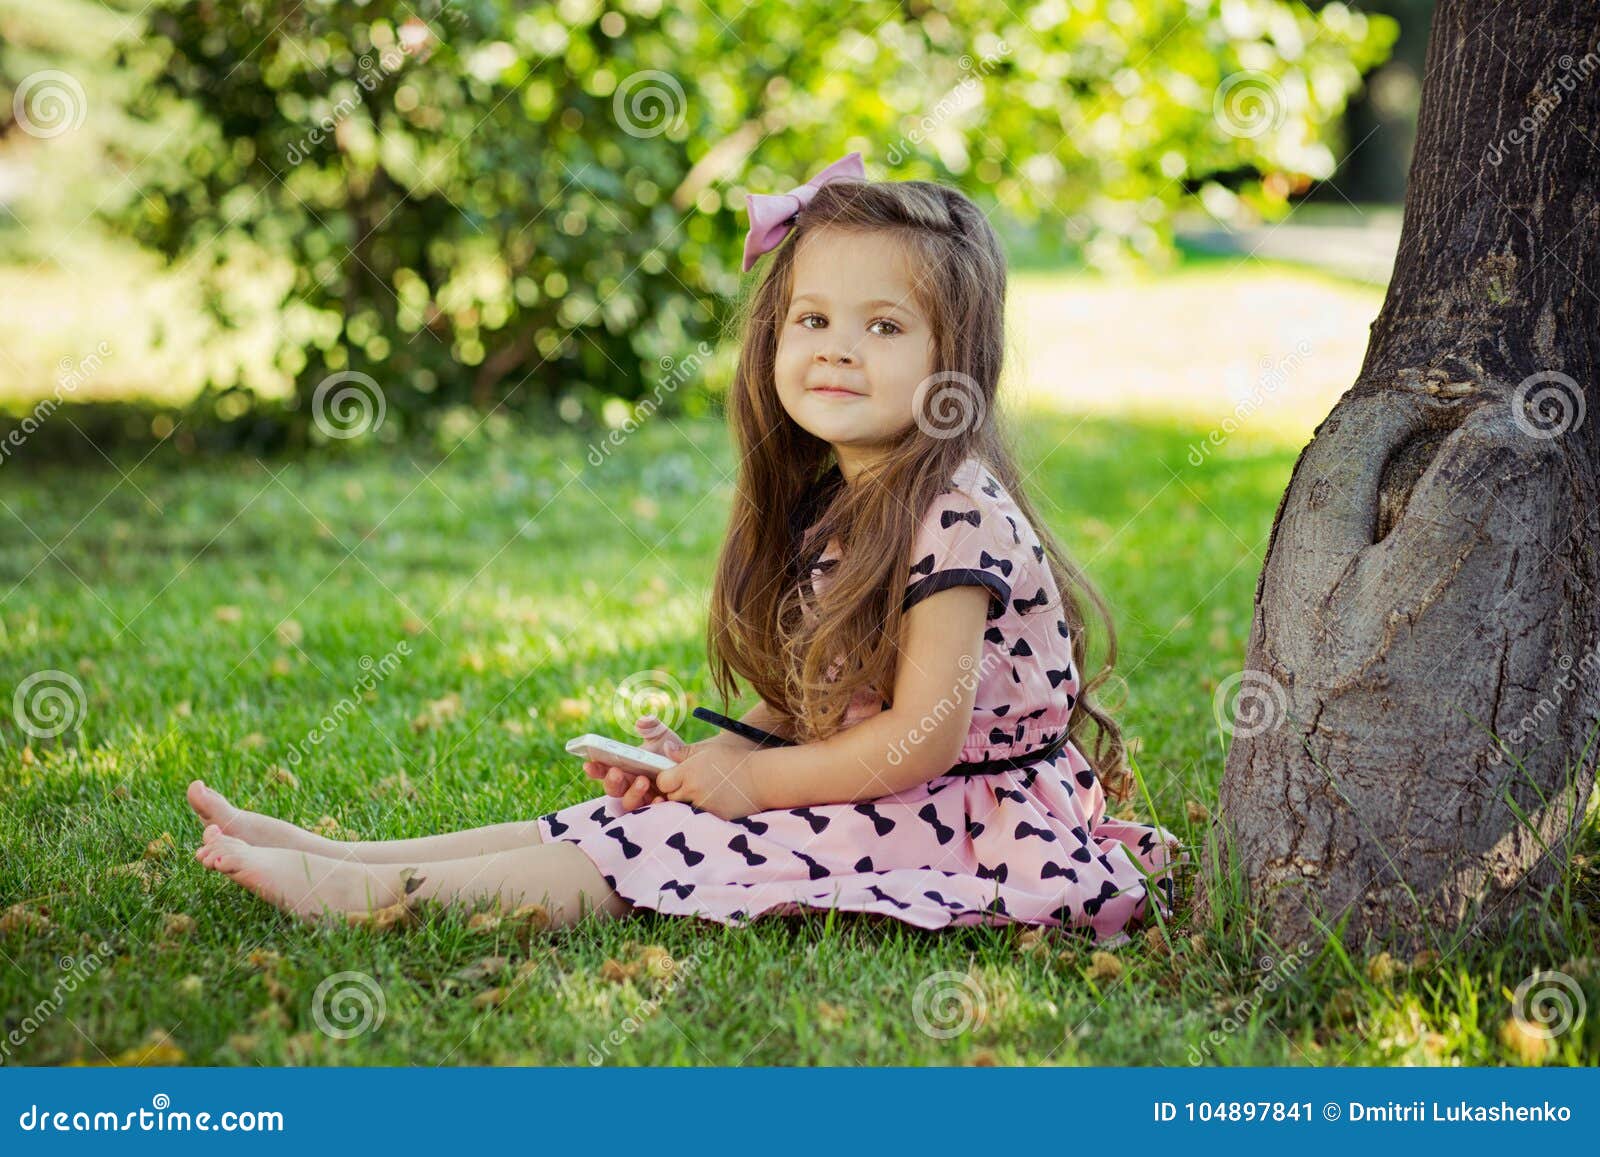 cute girl sitting on green grass close to old tree barefoot during summer time vacation in awesome stylish pink dress with cell ph